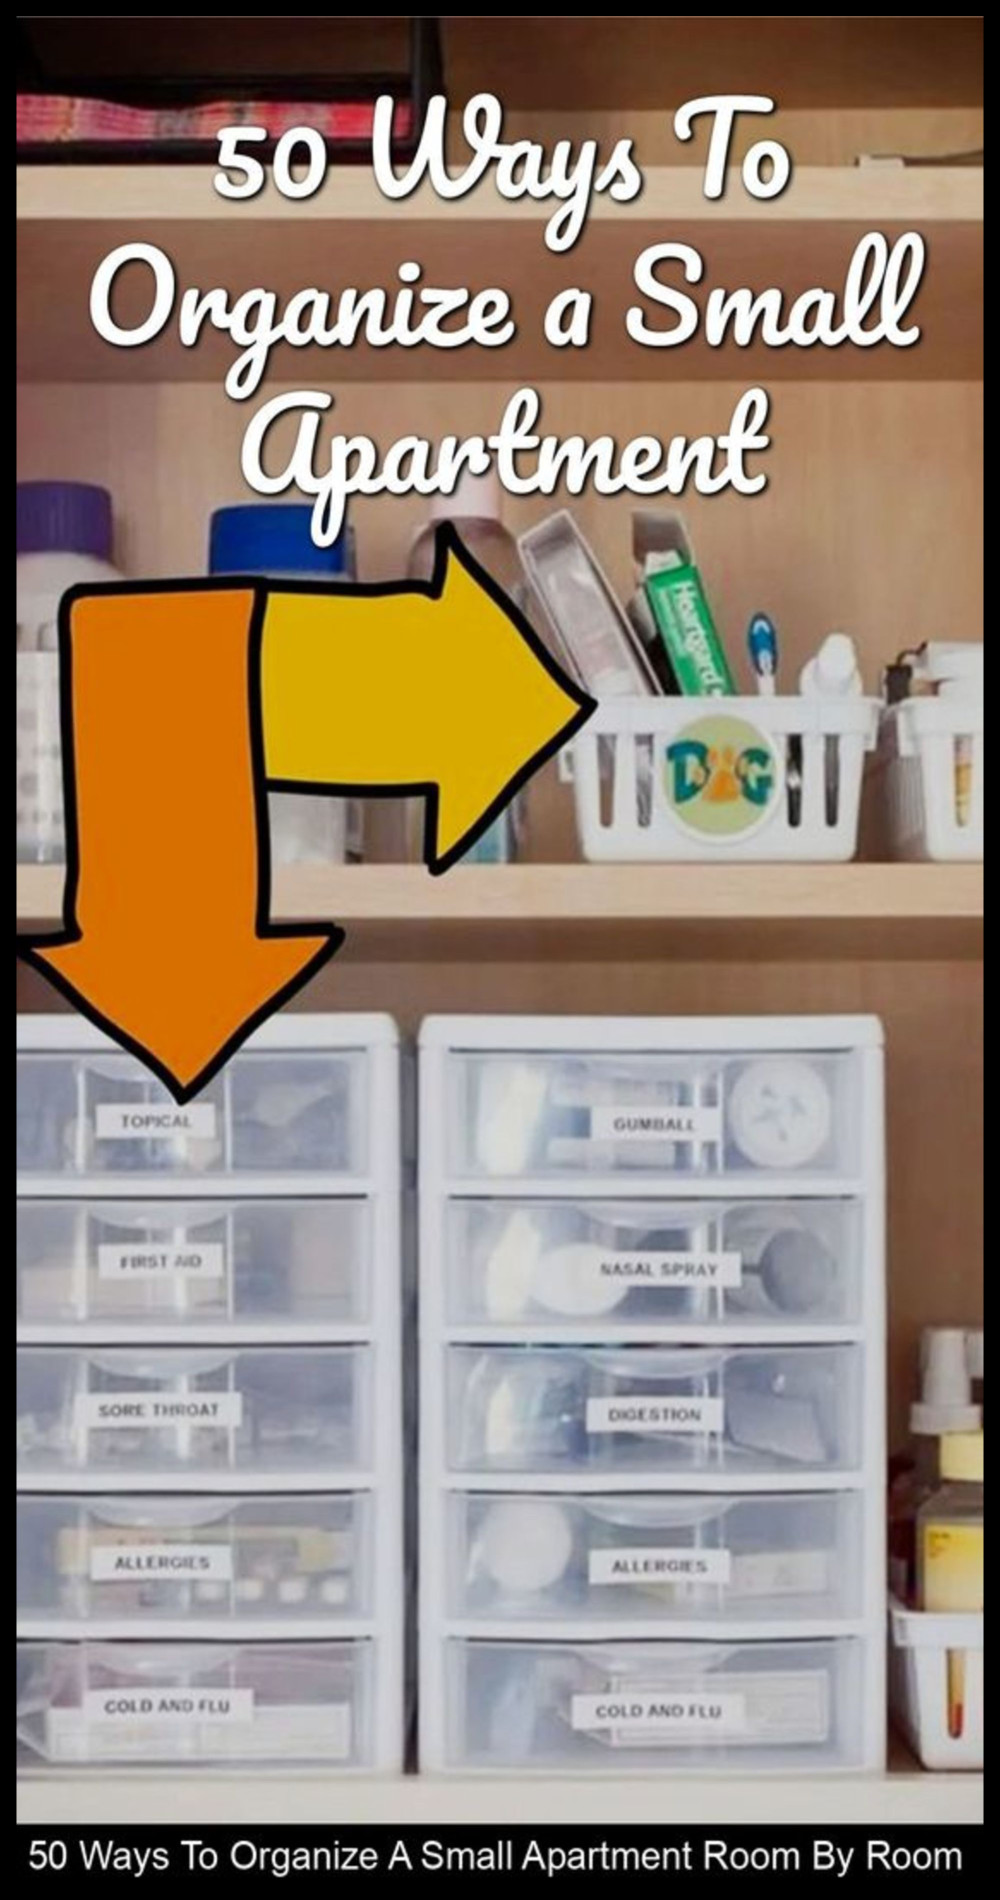 50 ways to organize a small apartment